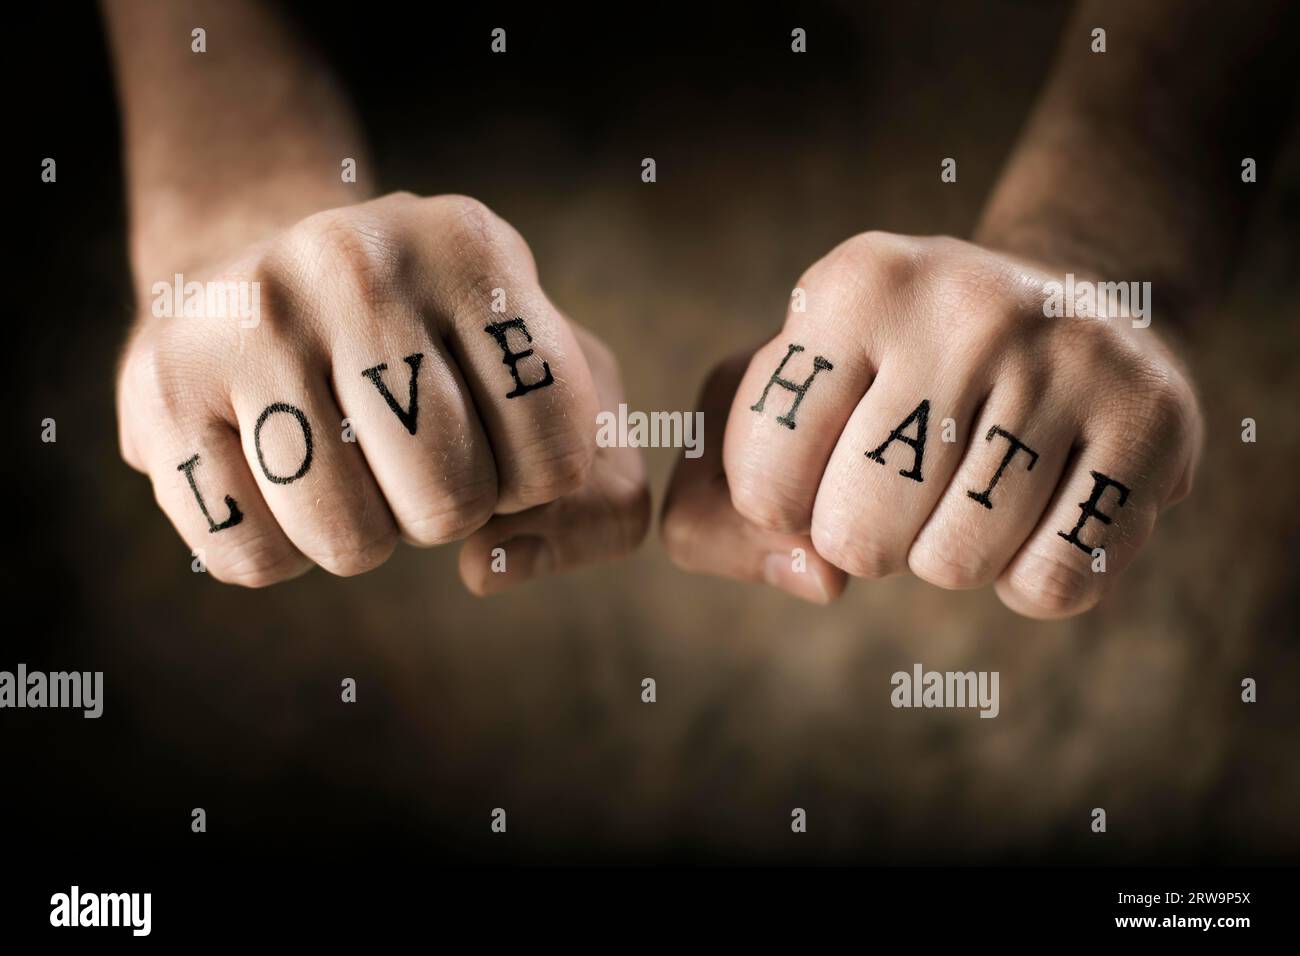 Man with (fake) Love and Hate tattoos on his hands Stock Photo